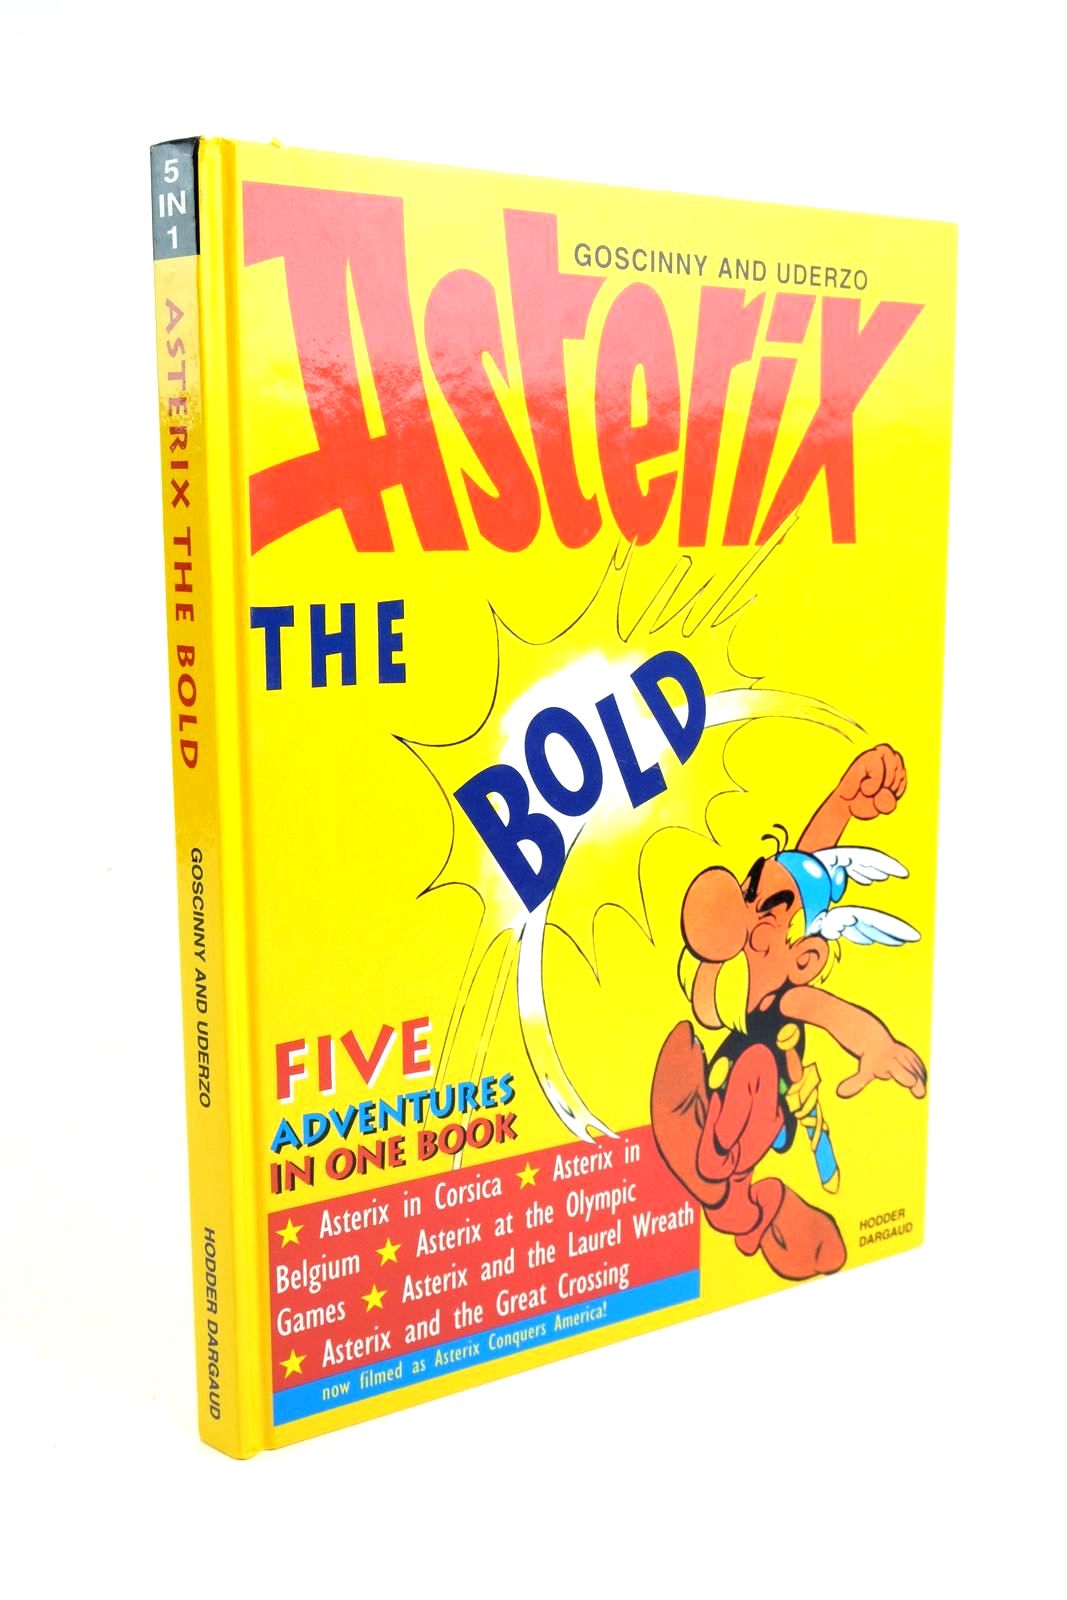 Photo of ASTERIX THE BOLD written by Goscinny, Rene illustrated by Uderzo, Albert published by Hodder Dargaud (STOCK CODE: 1322130)  for sale by Stella & Rose's Books